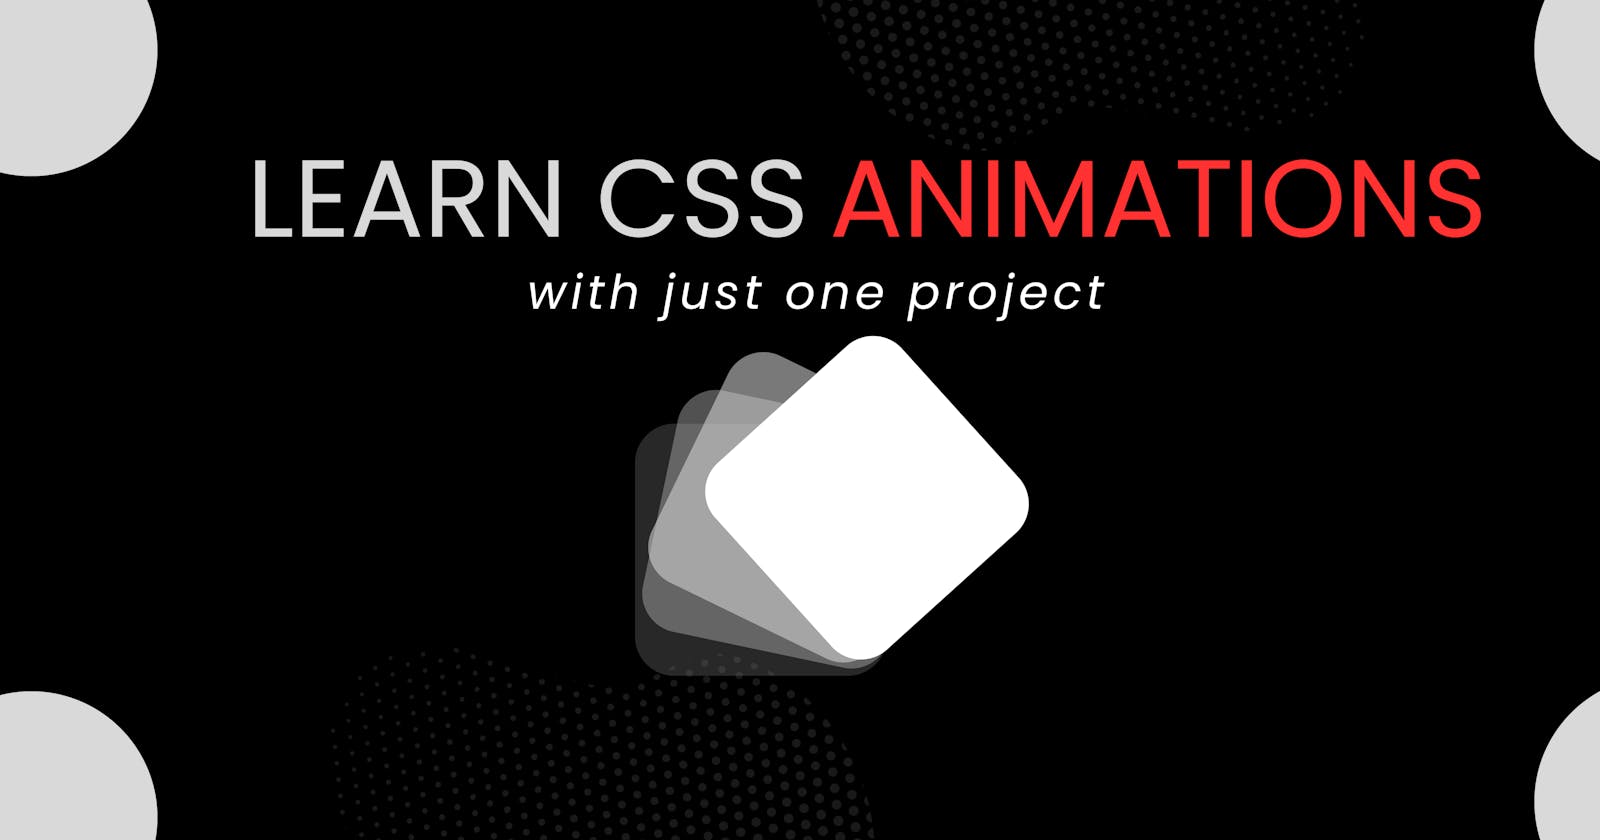 Learn CSS animation with one project